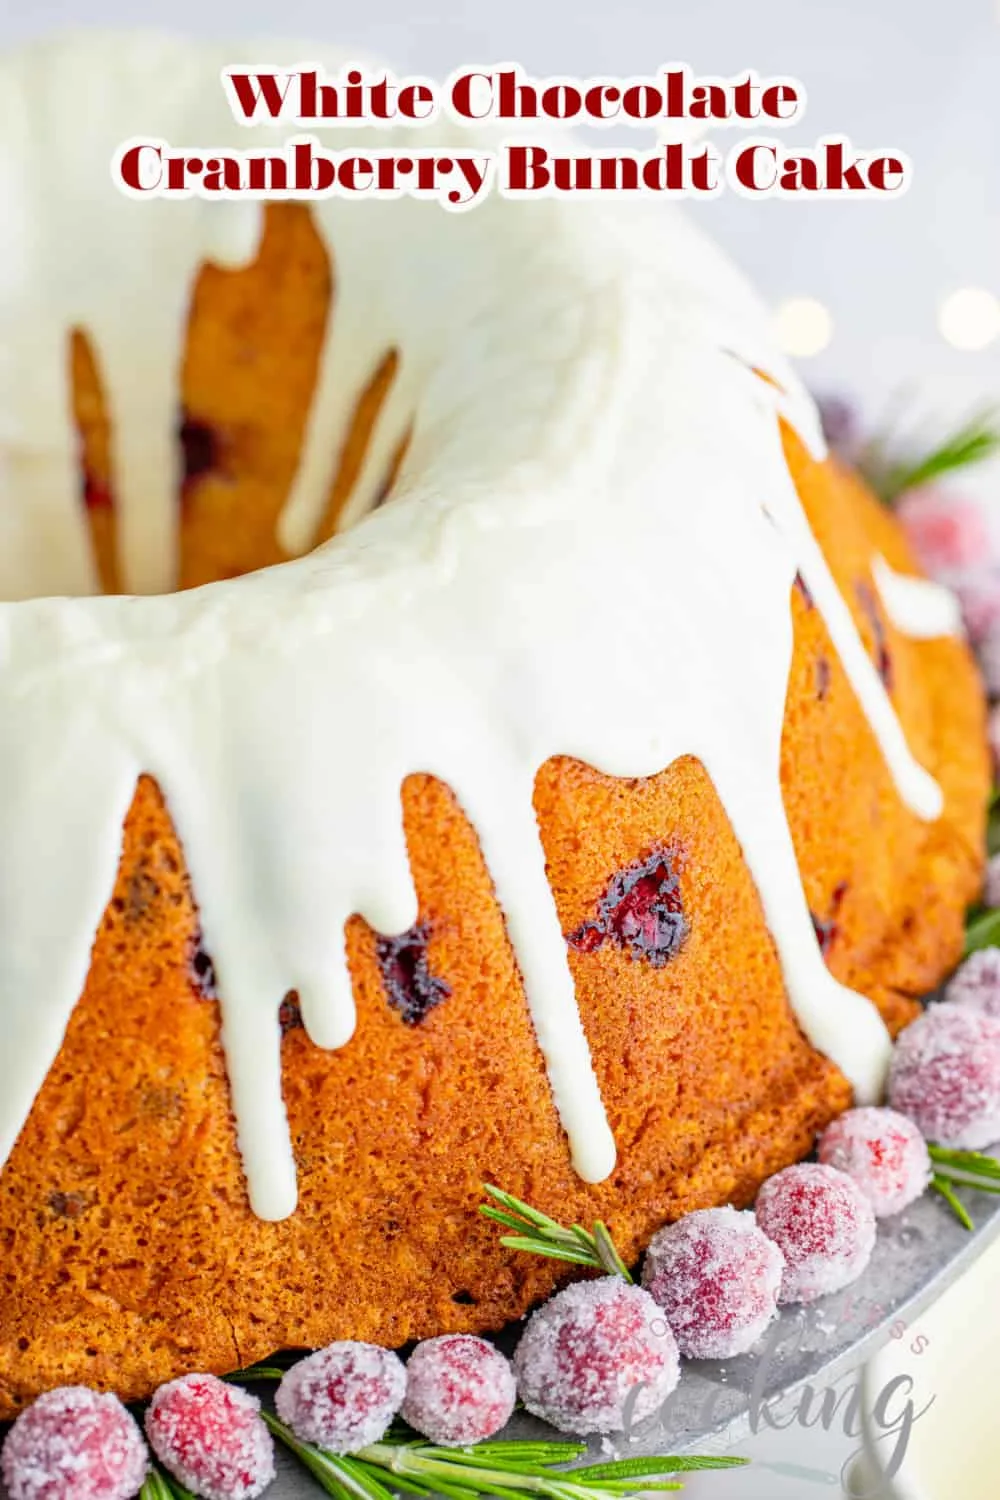 With its snowy glaze and a glistening garnish of sugared berries, this White Chocolate Cranberry Bundt Cake will be a showstopper on your holiday dessert table. Perfect for Thanksgiving, Christmas, or New Years’, this gorgeous cake is a must-make for festive celebrations. via @Mooreorlesscook